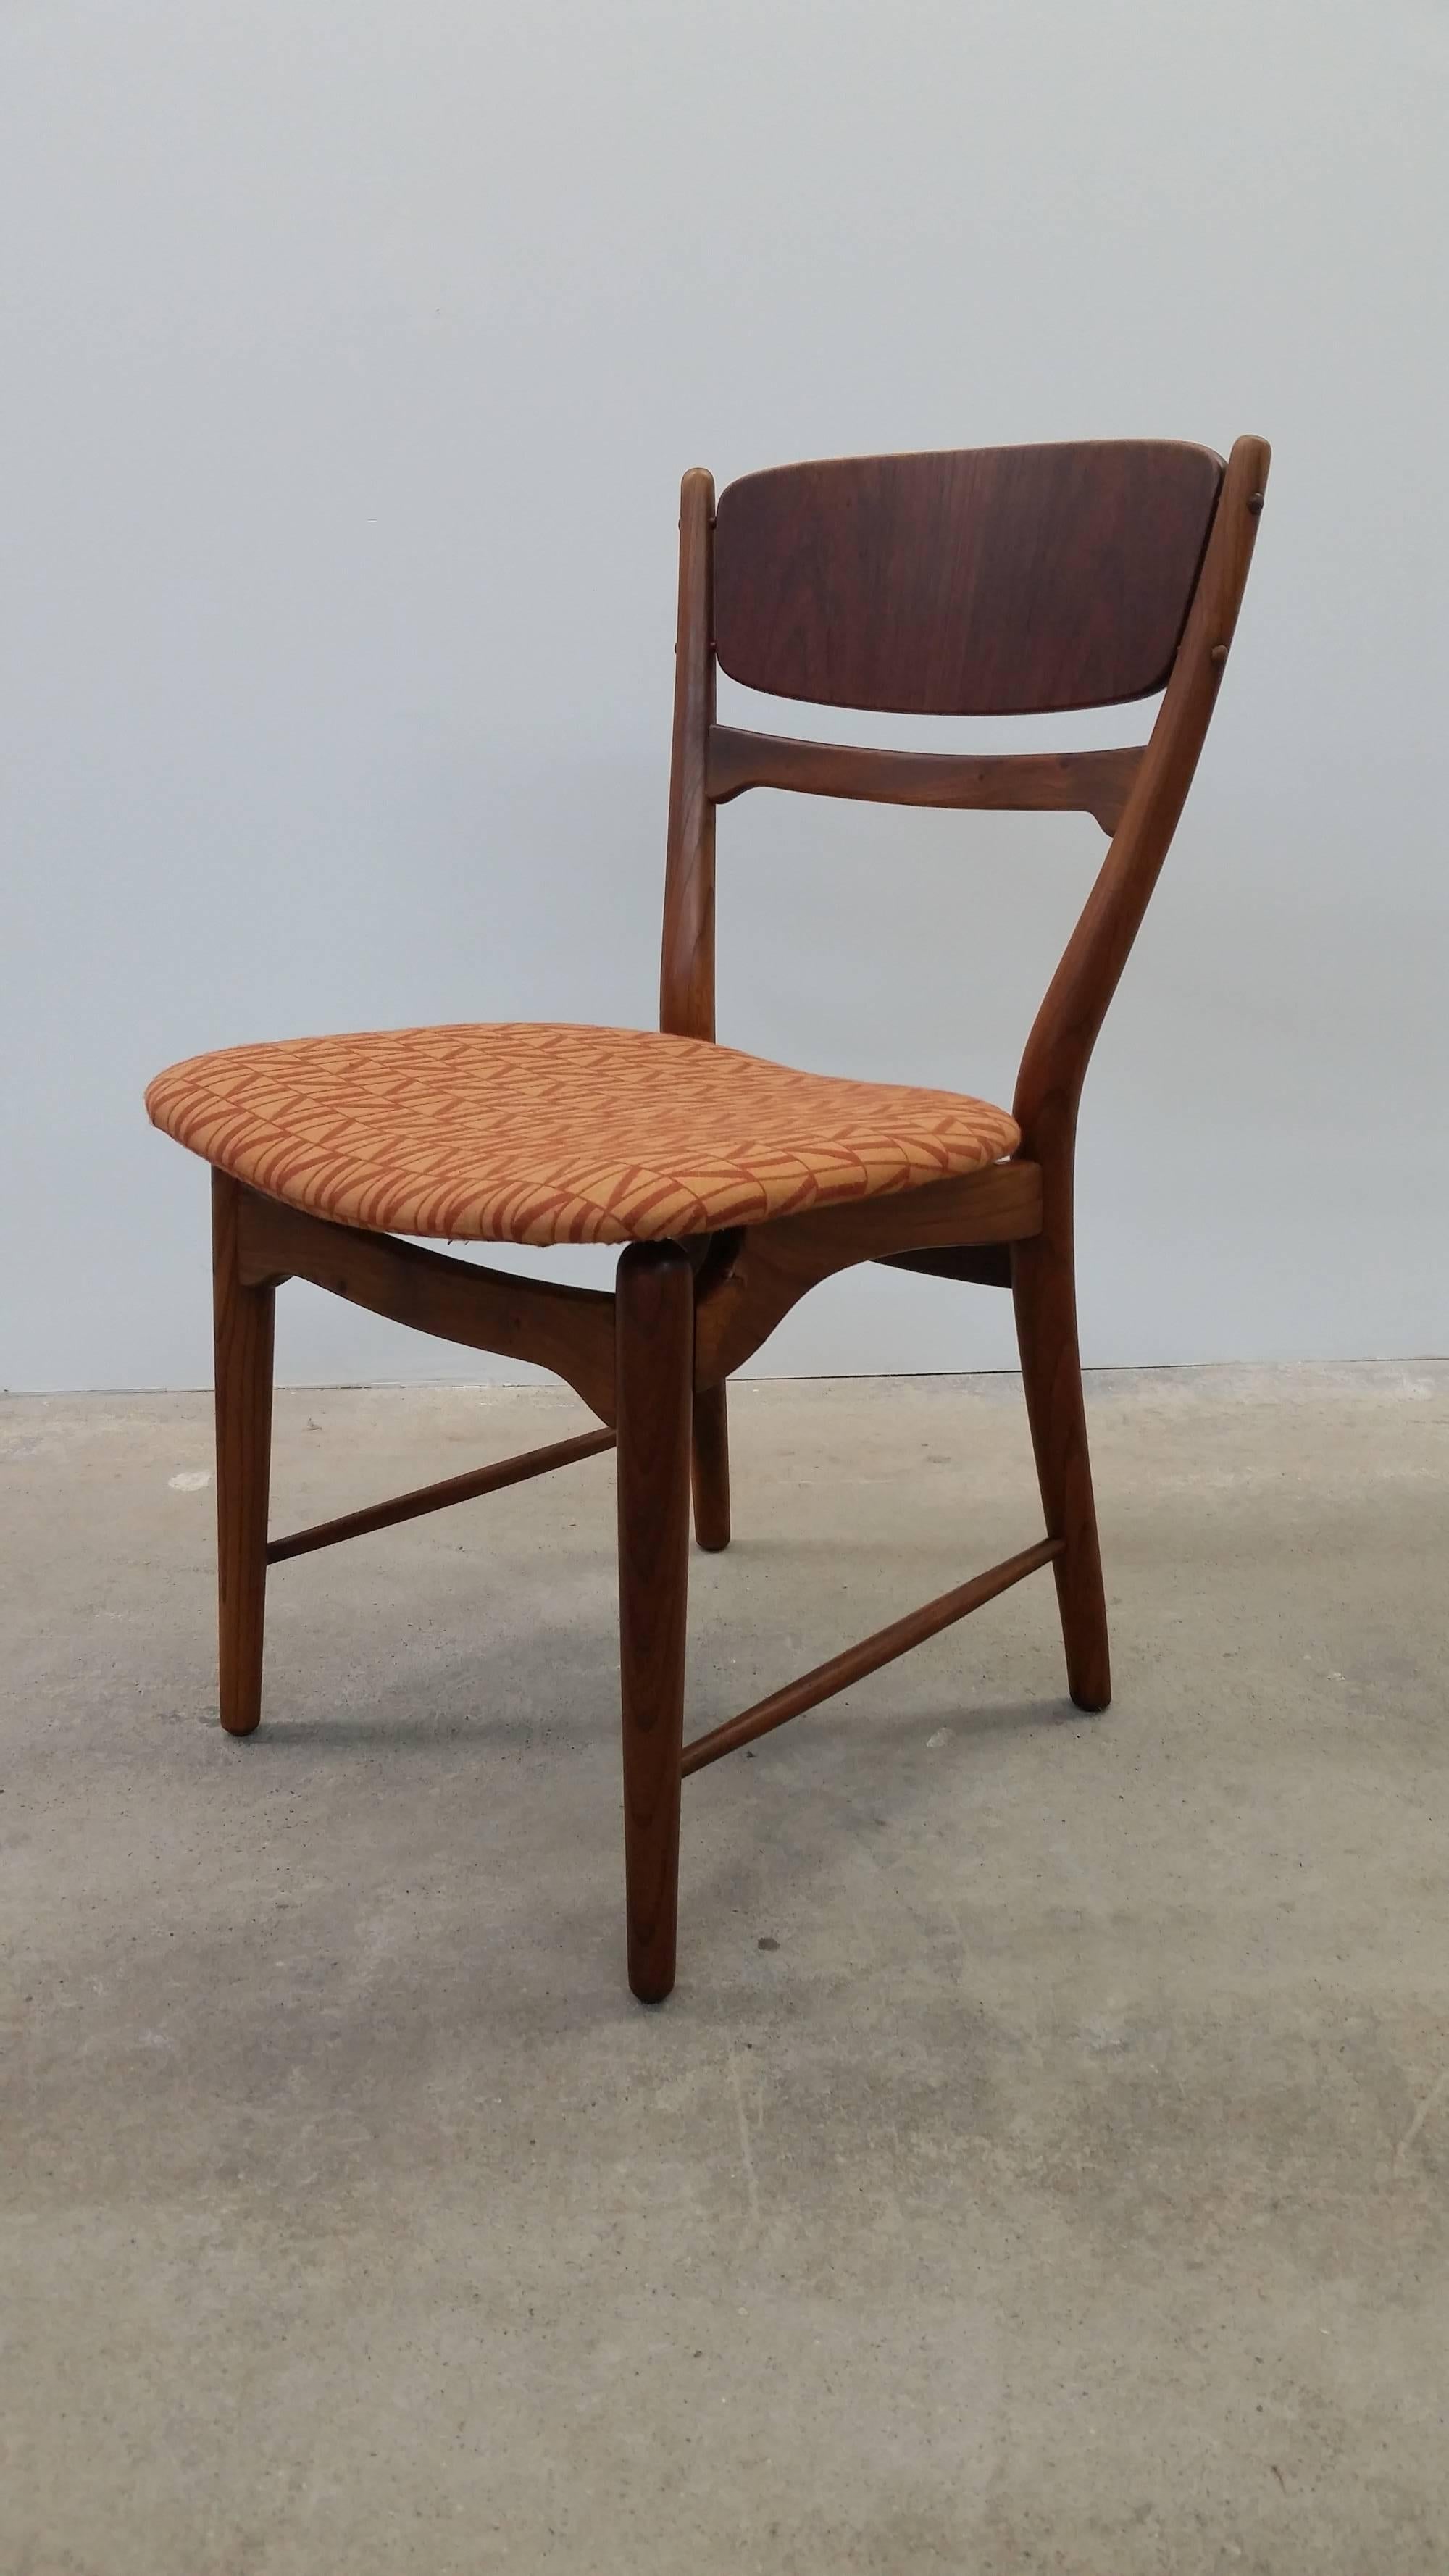 Scandinavian Modern Set of Four Dining Chairs in Walnut and Teak, by Arne Wahl Iversen For Sale